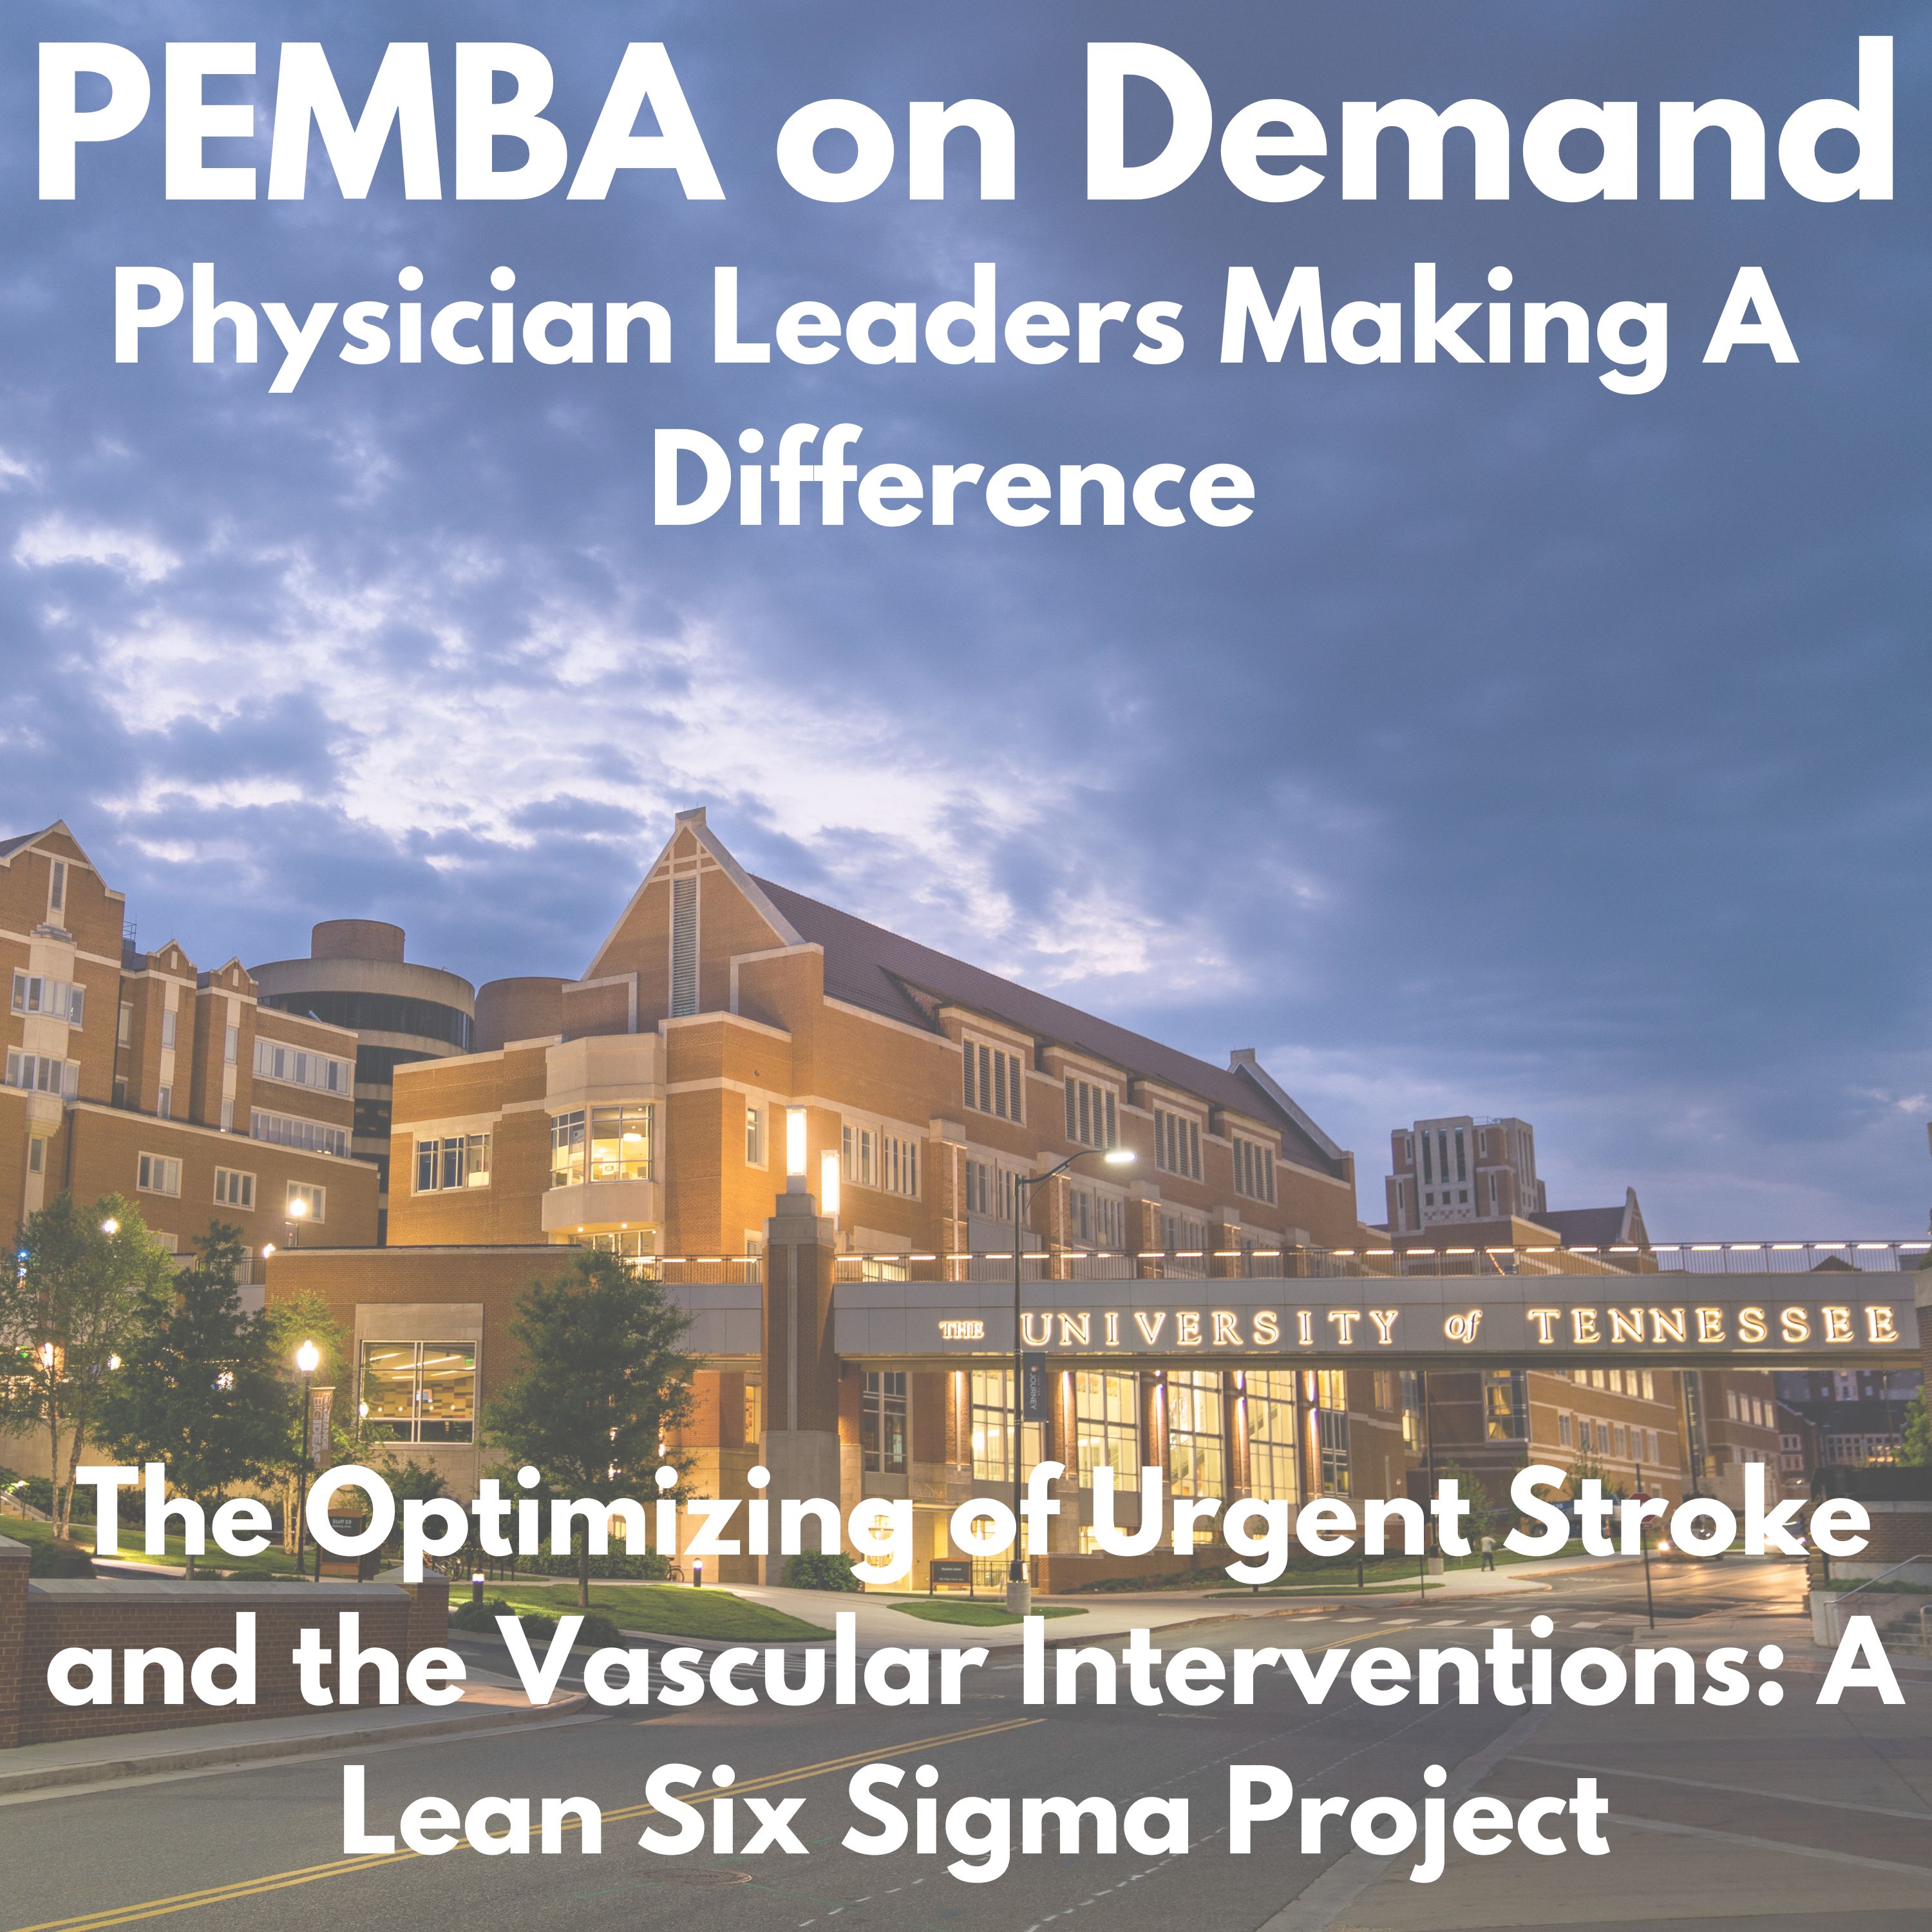 The Optimizing of Urgent Stroke and the Vascular Interventions: A Lean Six Sigma Project